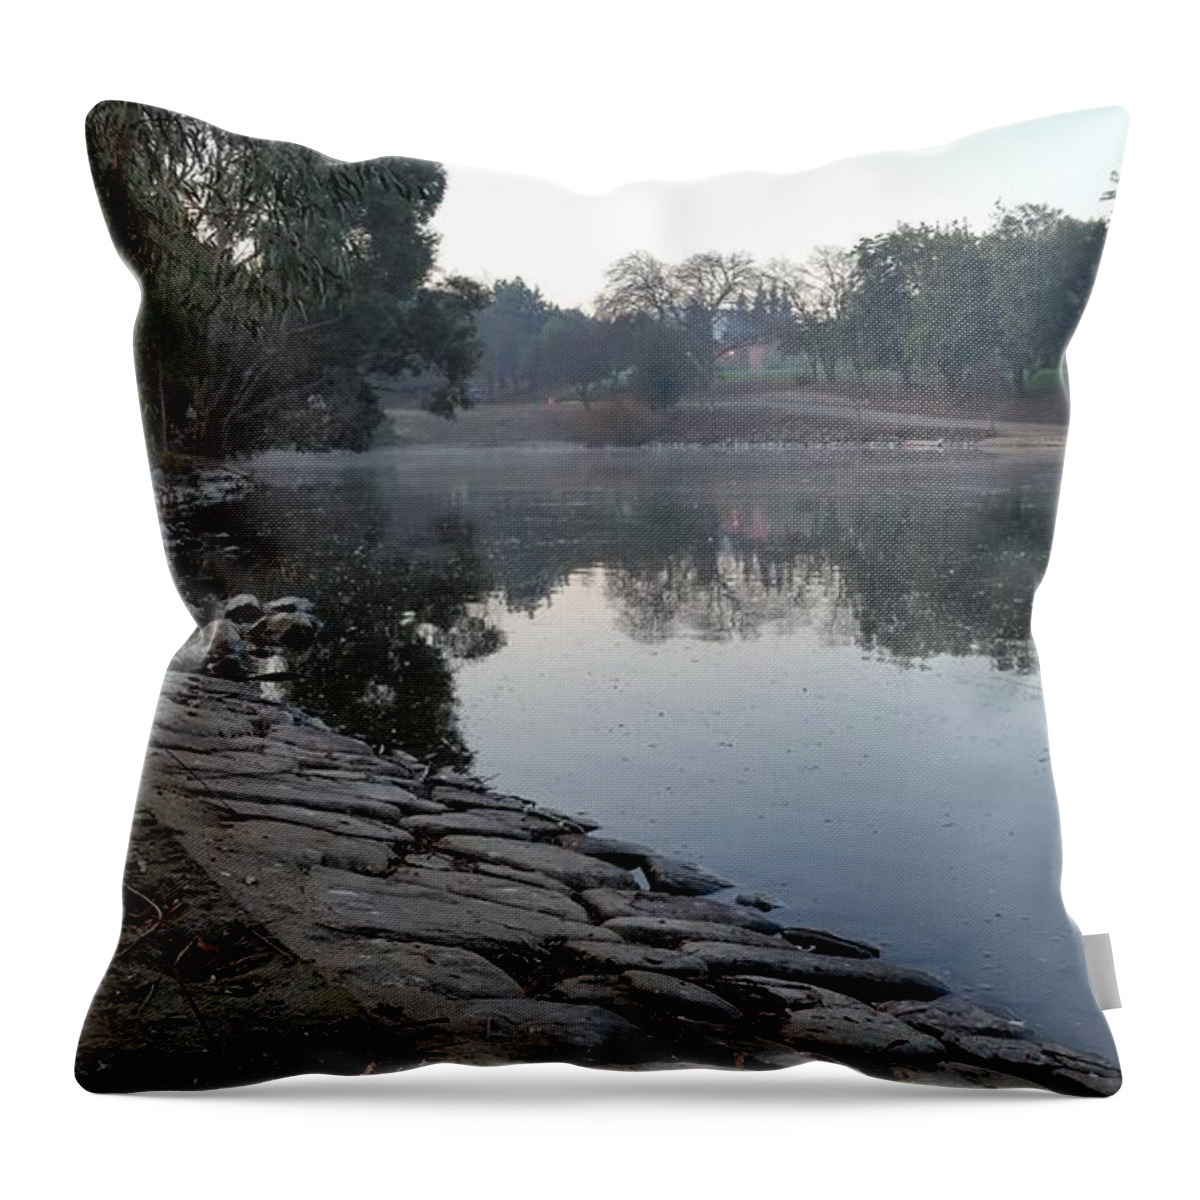 Lake Throw Pillow featuring the photograph View By The Lake by Remegio Onia